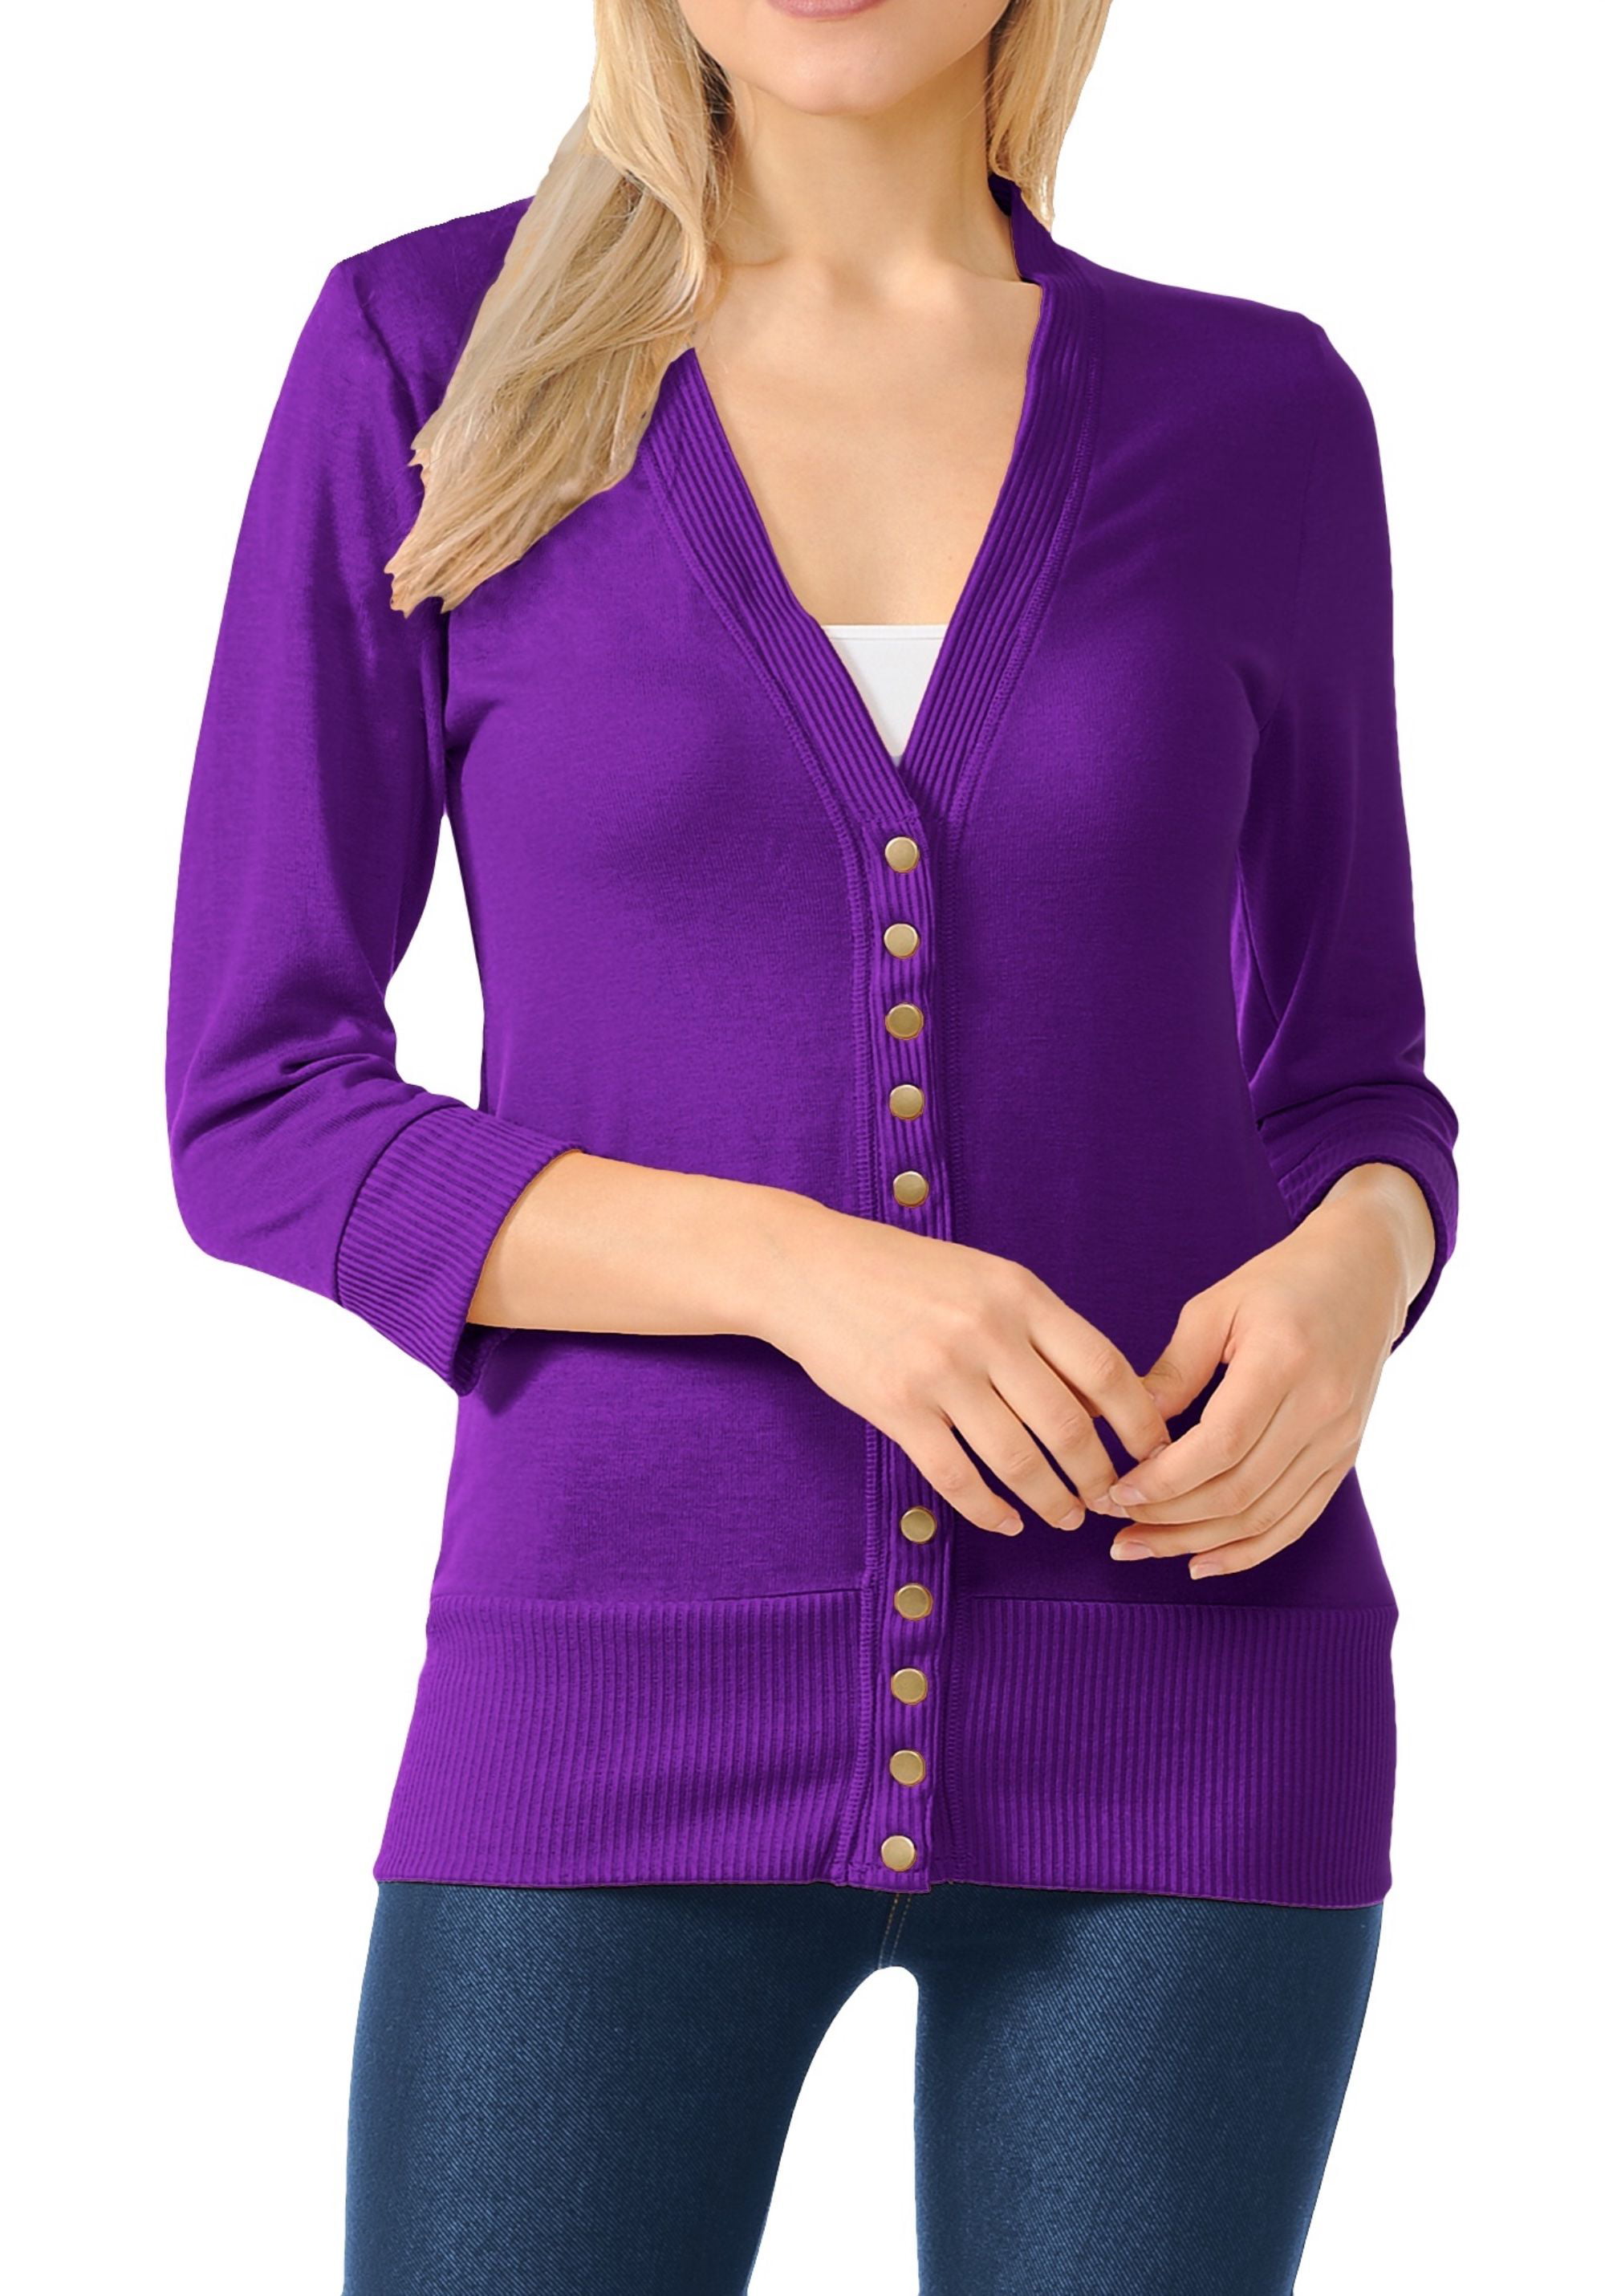 Clothingave Women S 3 4 Sleeve Soft Snap Button Cardigan With Ribbed Cuffs And Hem In Over 20